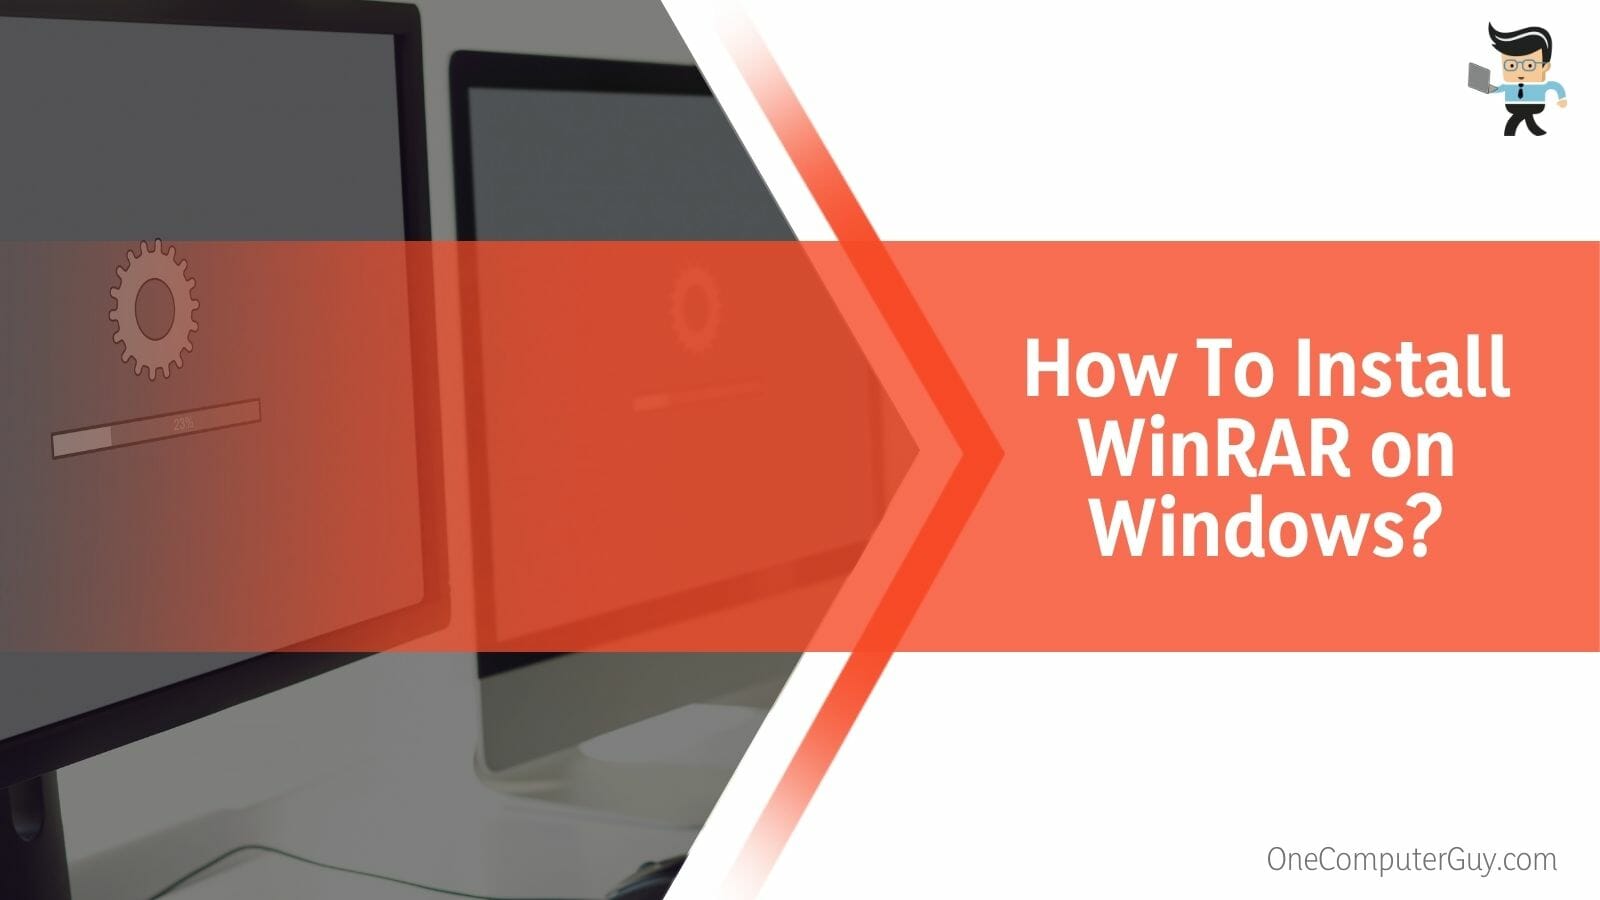 How To Install WinRAR on Windows